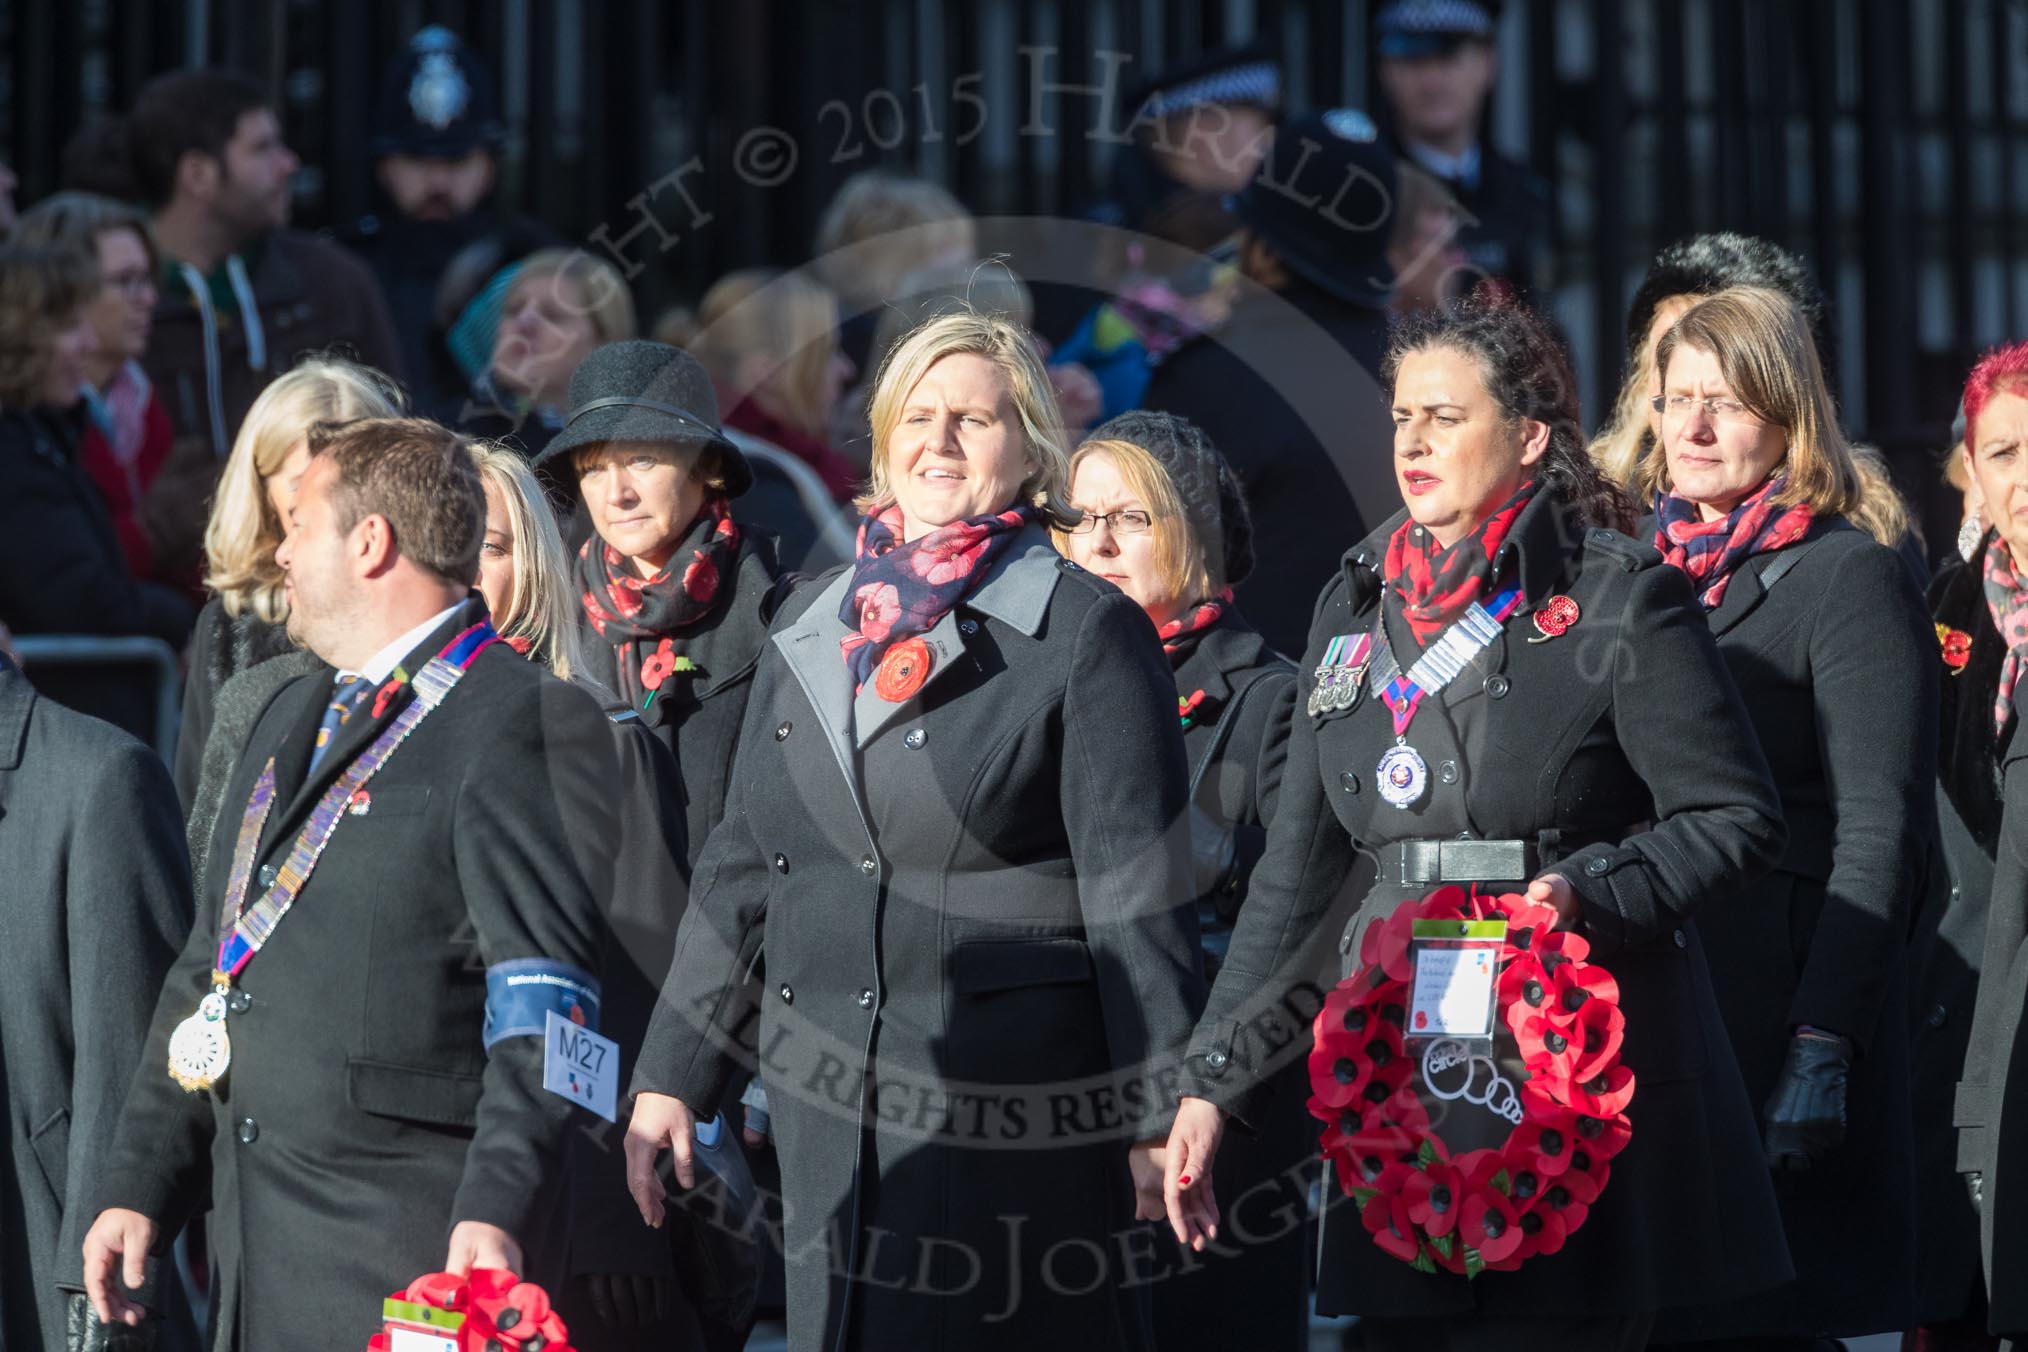 March Past, Remembrance Sunday at the Cenotaph 2016: M27 National Association of Round Tables.
Cenotaph, Whitehall, London SW1,
London,
Greater London,
United Kingdom,
on 13 November 2016 at 13:17, image #2721